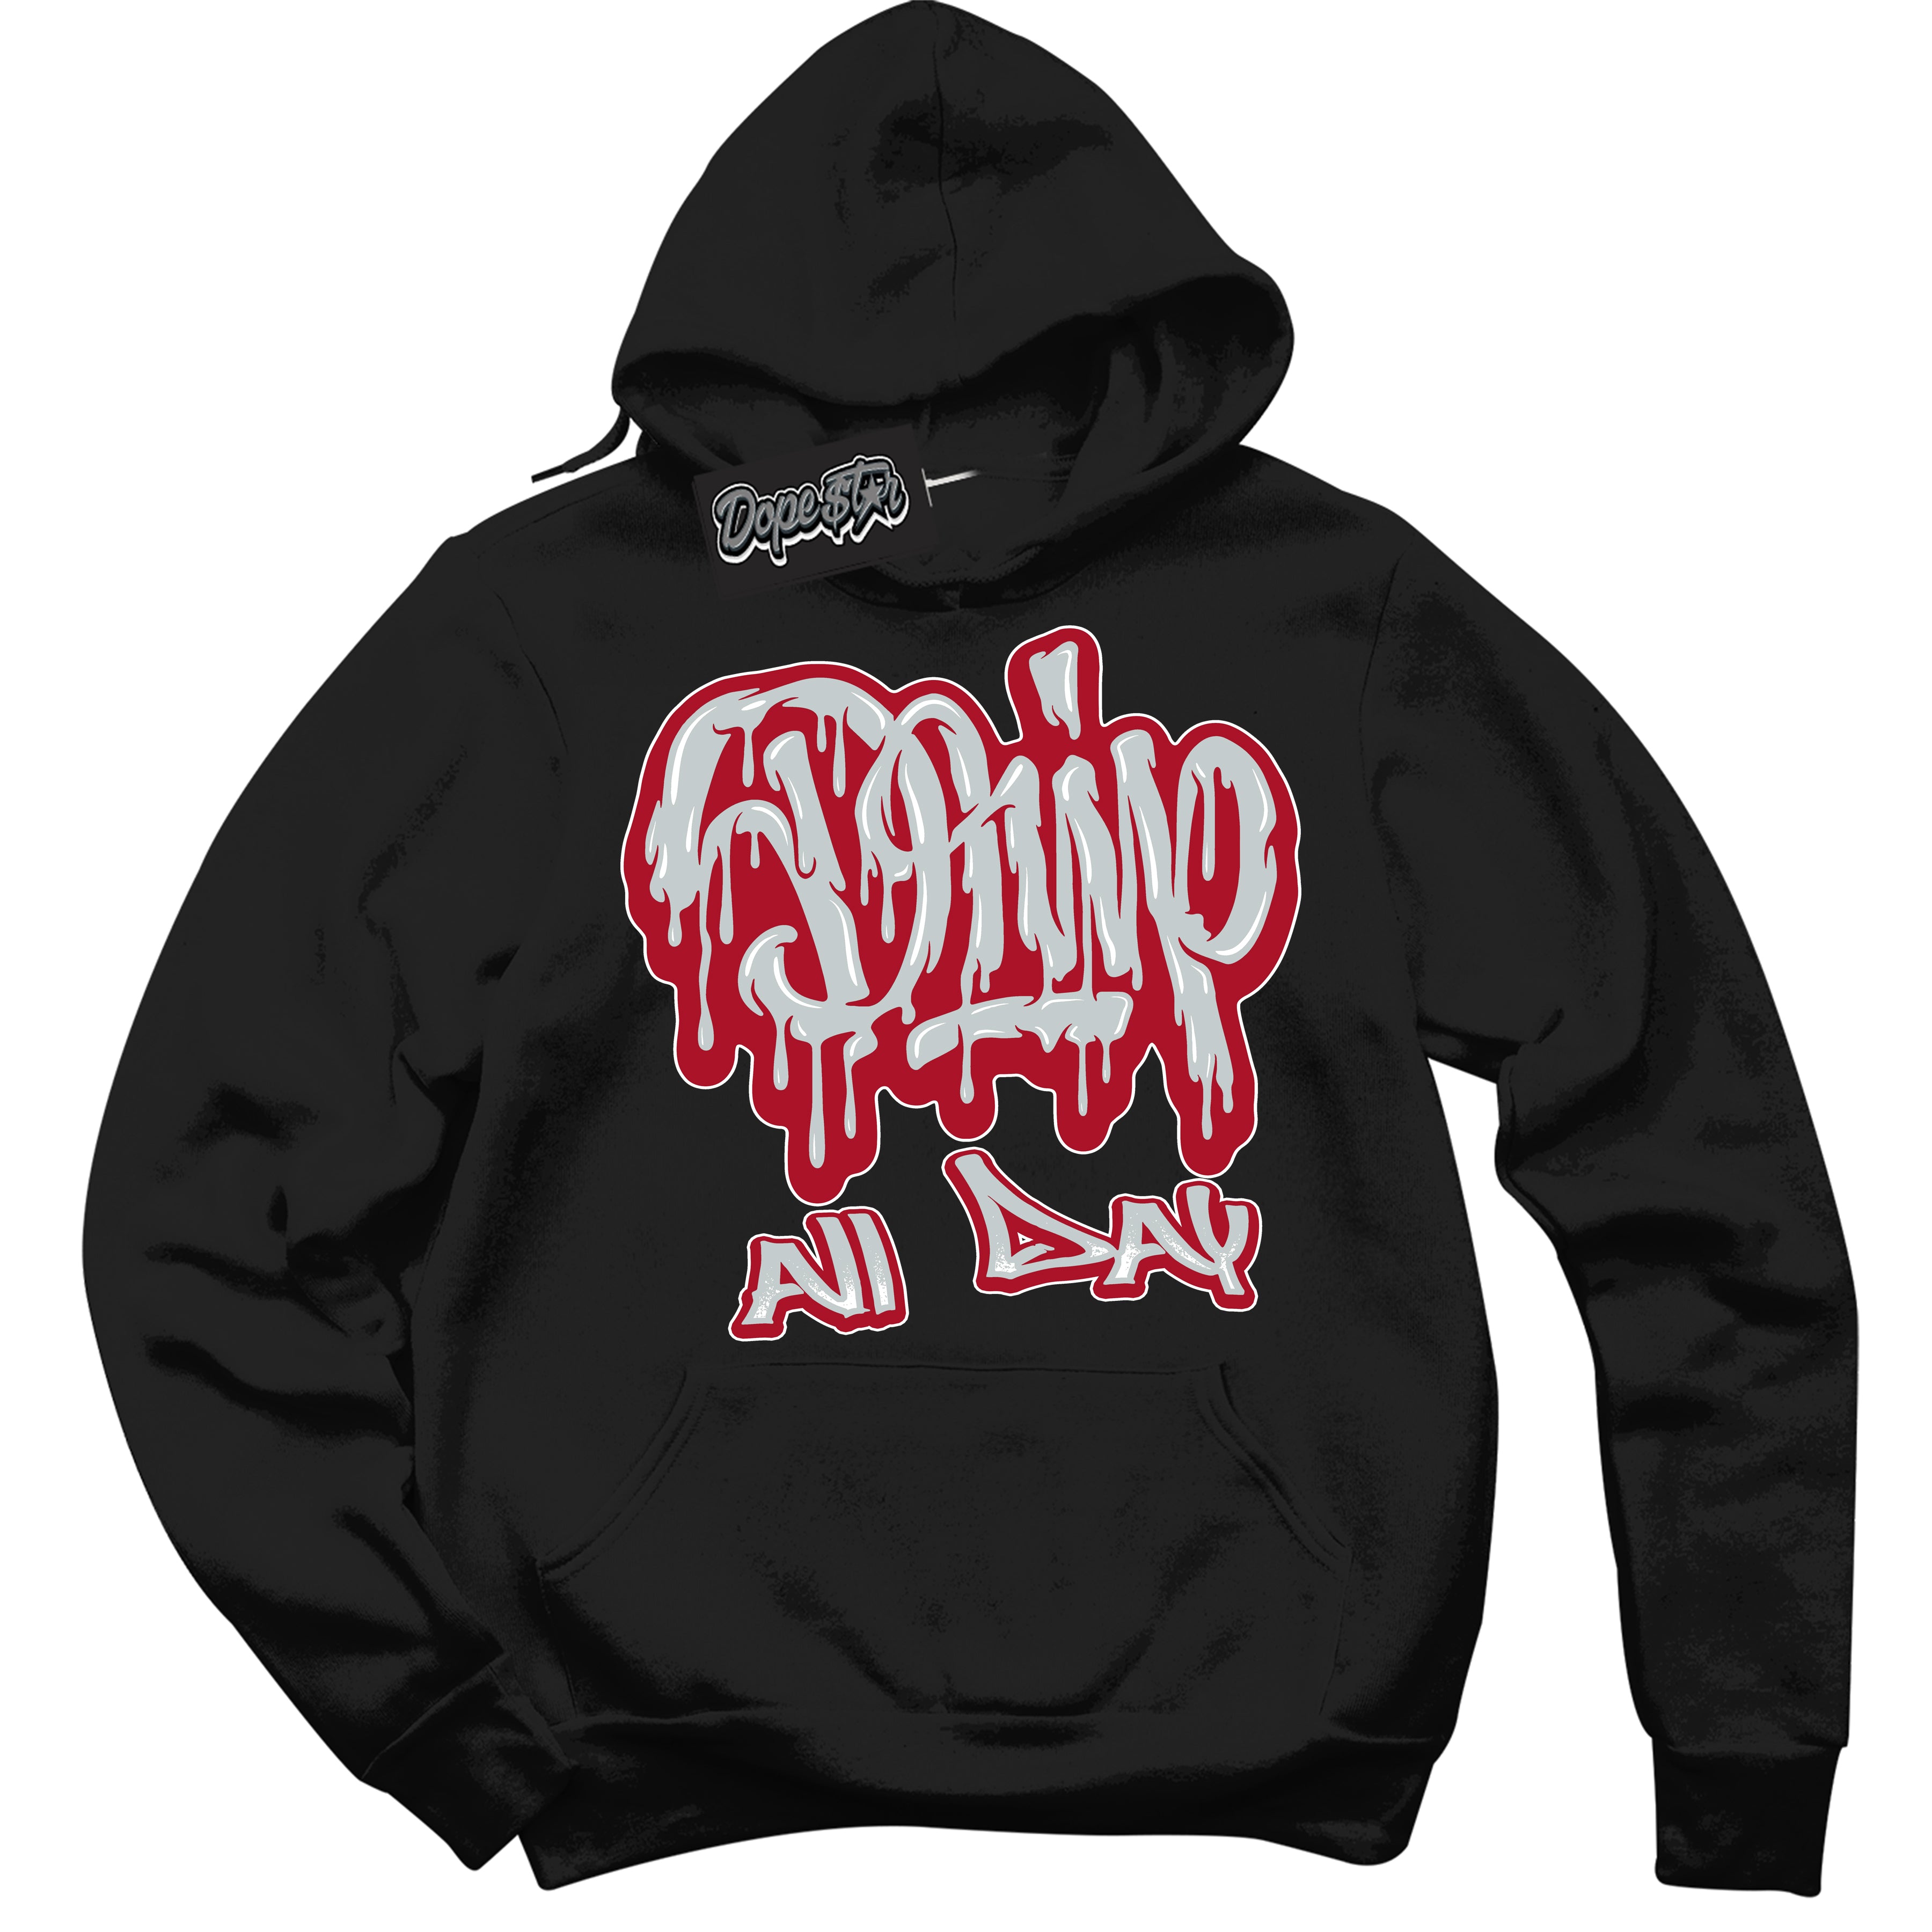 Cool Black Hoodie with “ Drip All Day ”  design that Perfectly Matches  Reverse Ultraman Sneakers.